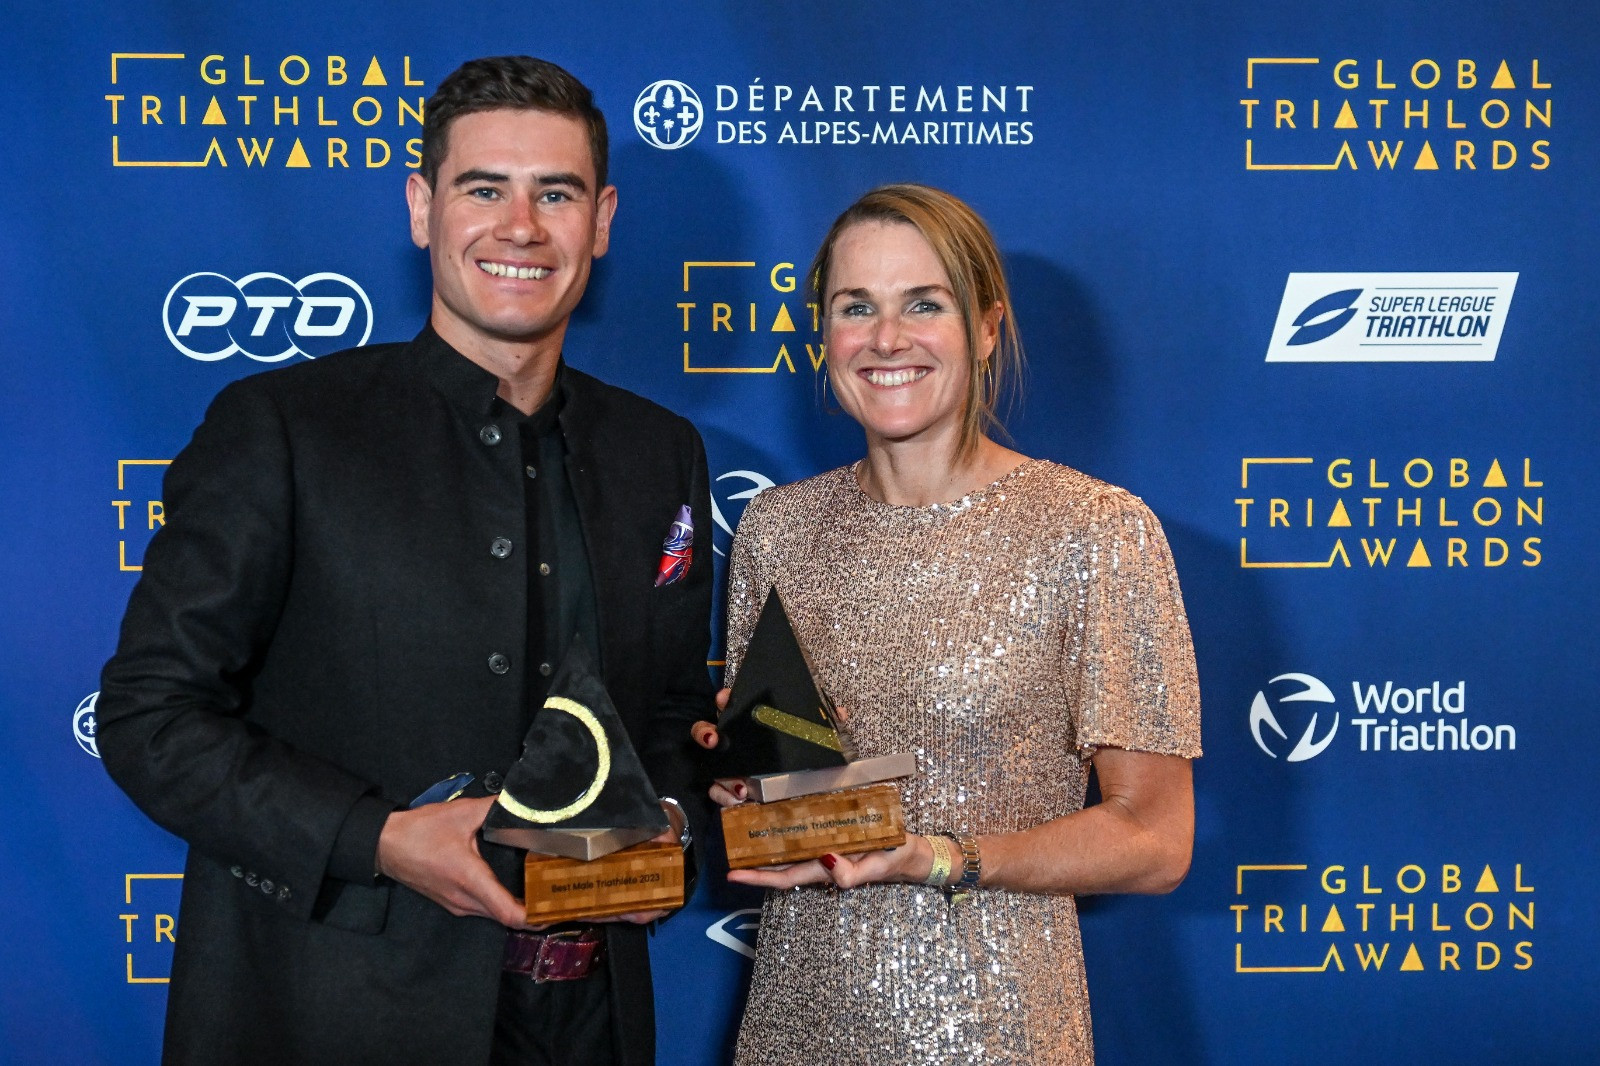 Gustav Iden and Dame Flora Duffy were named triathletes of the year at the Global Triathlon Awards ©GTA